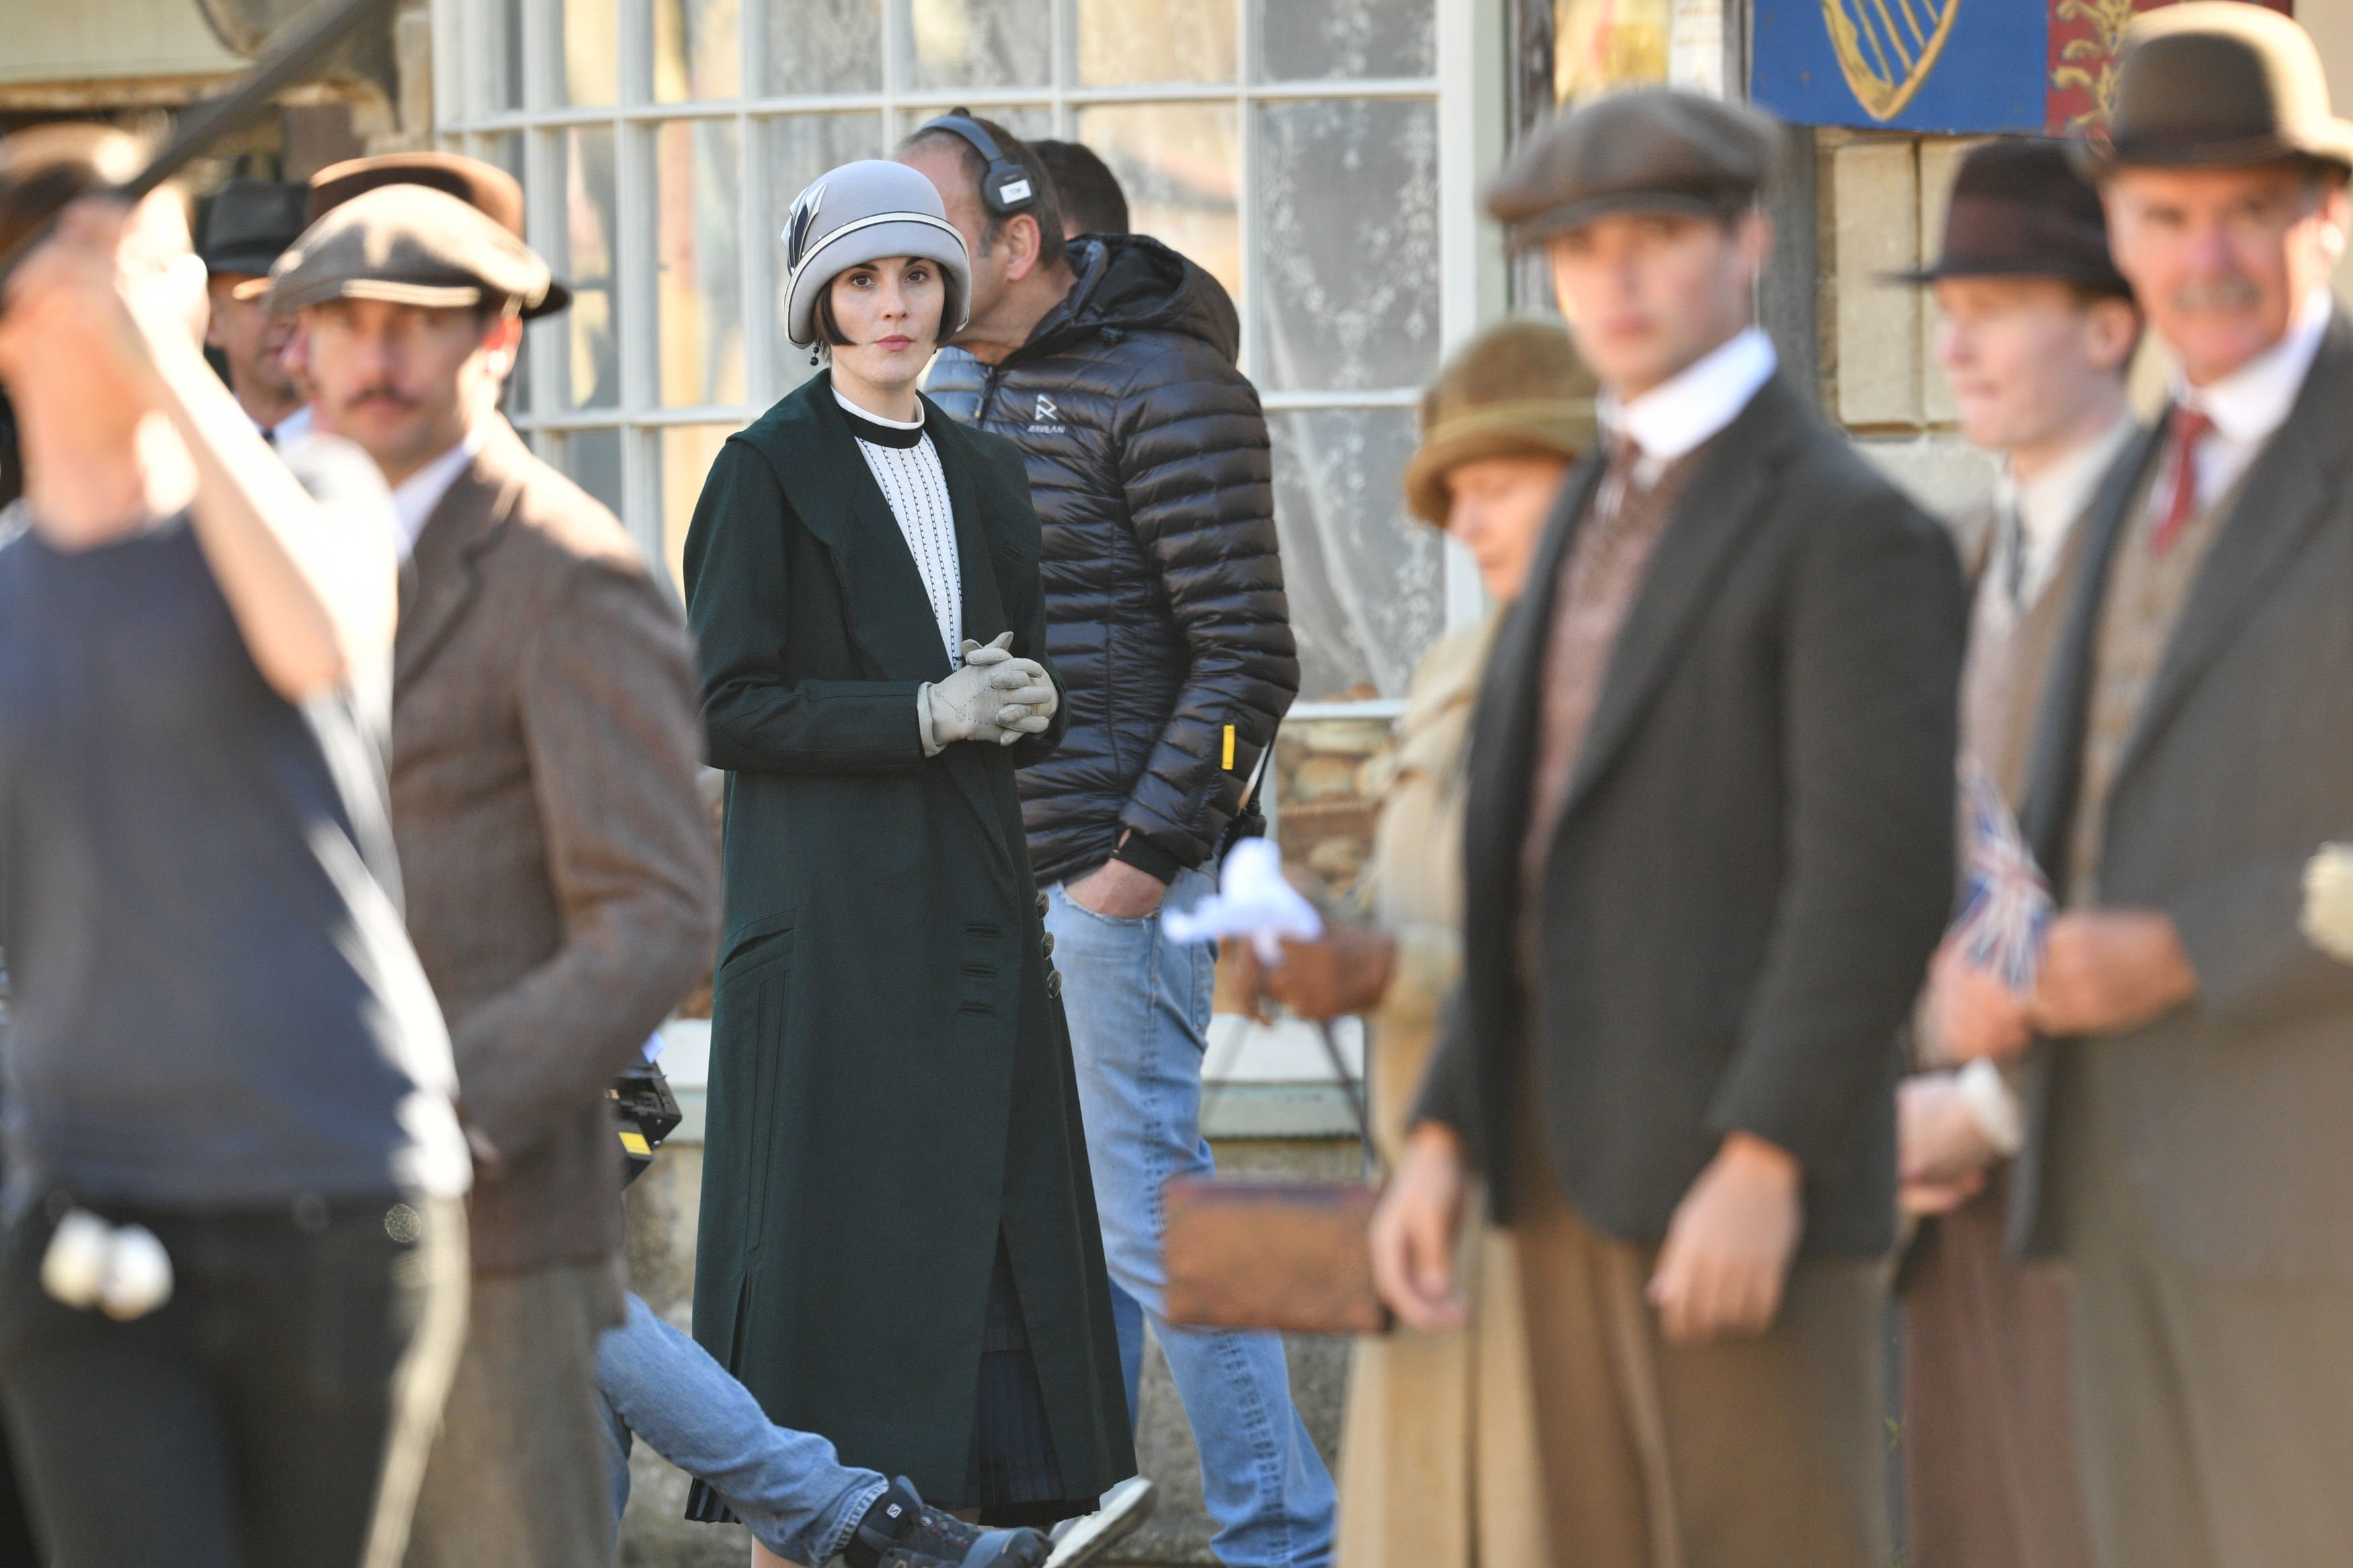 Michelle Dockery and other cast members on the Downton Abbey film set in Lacock, Wiltshire